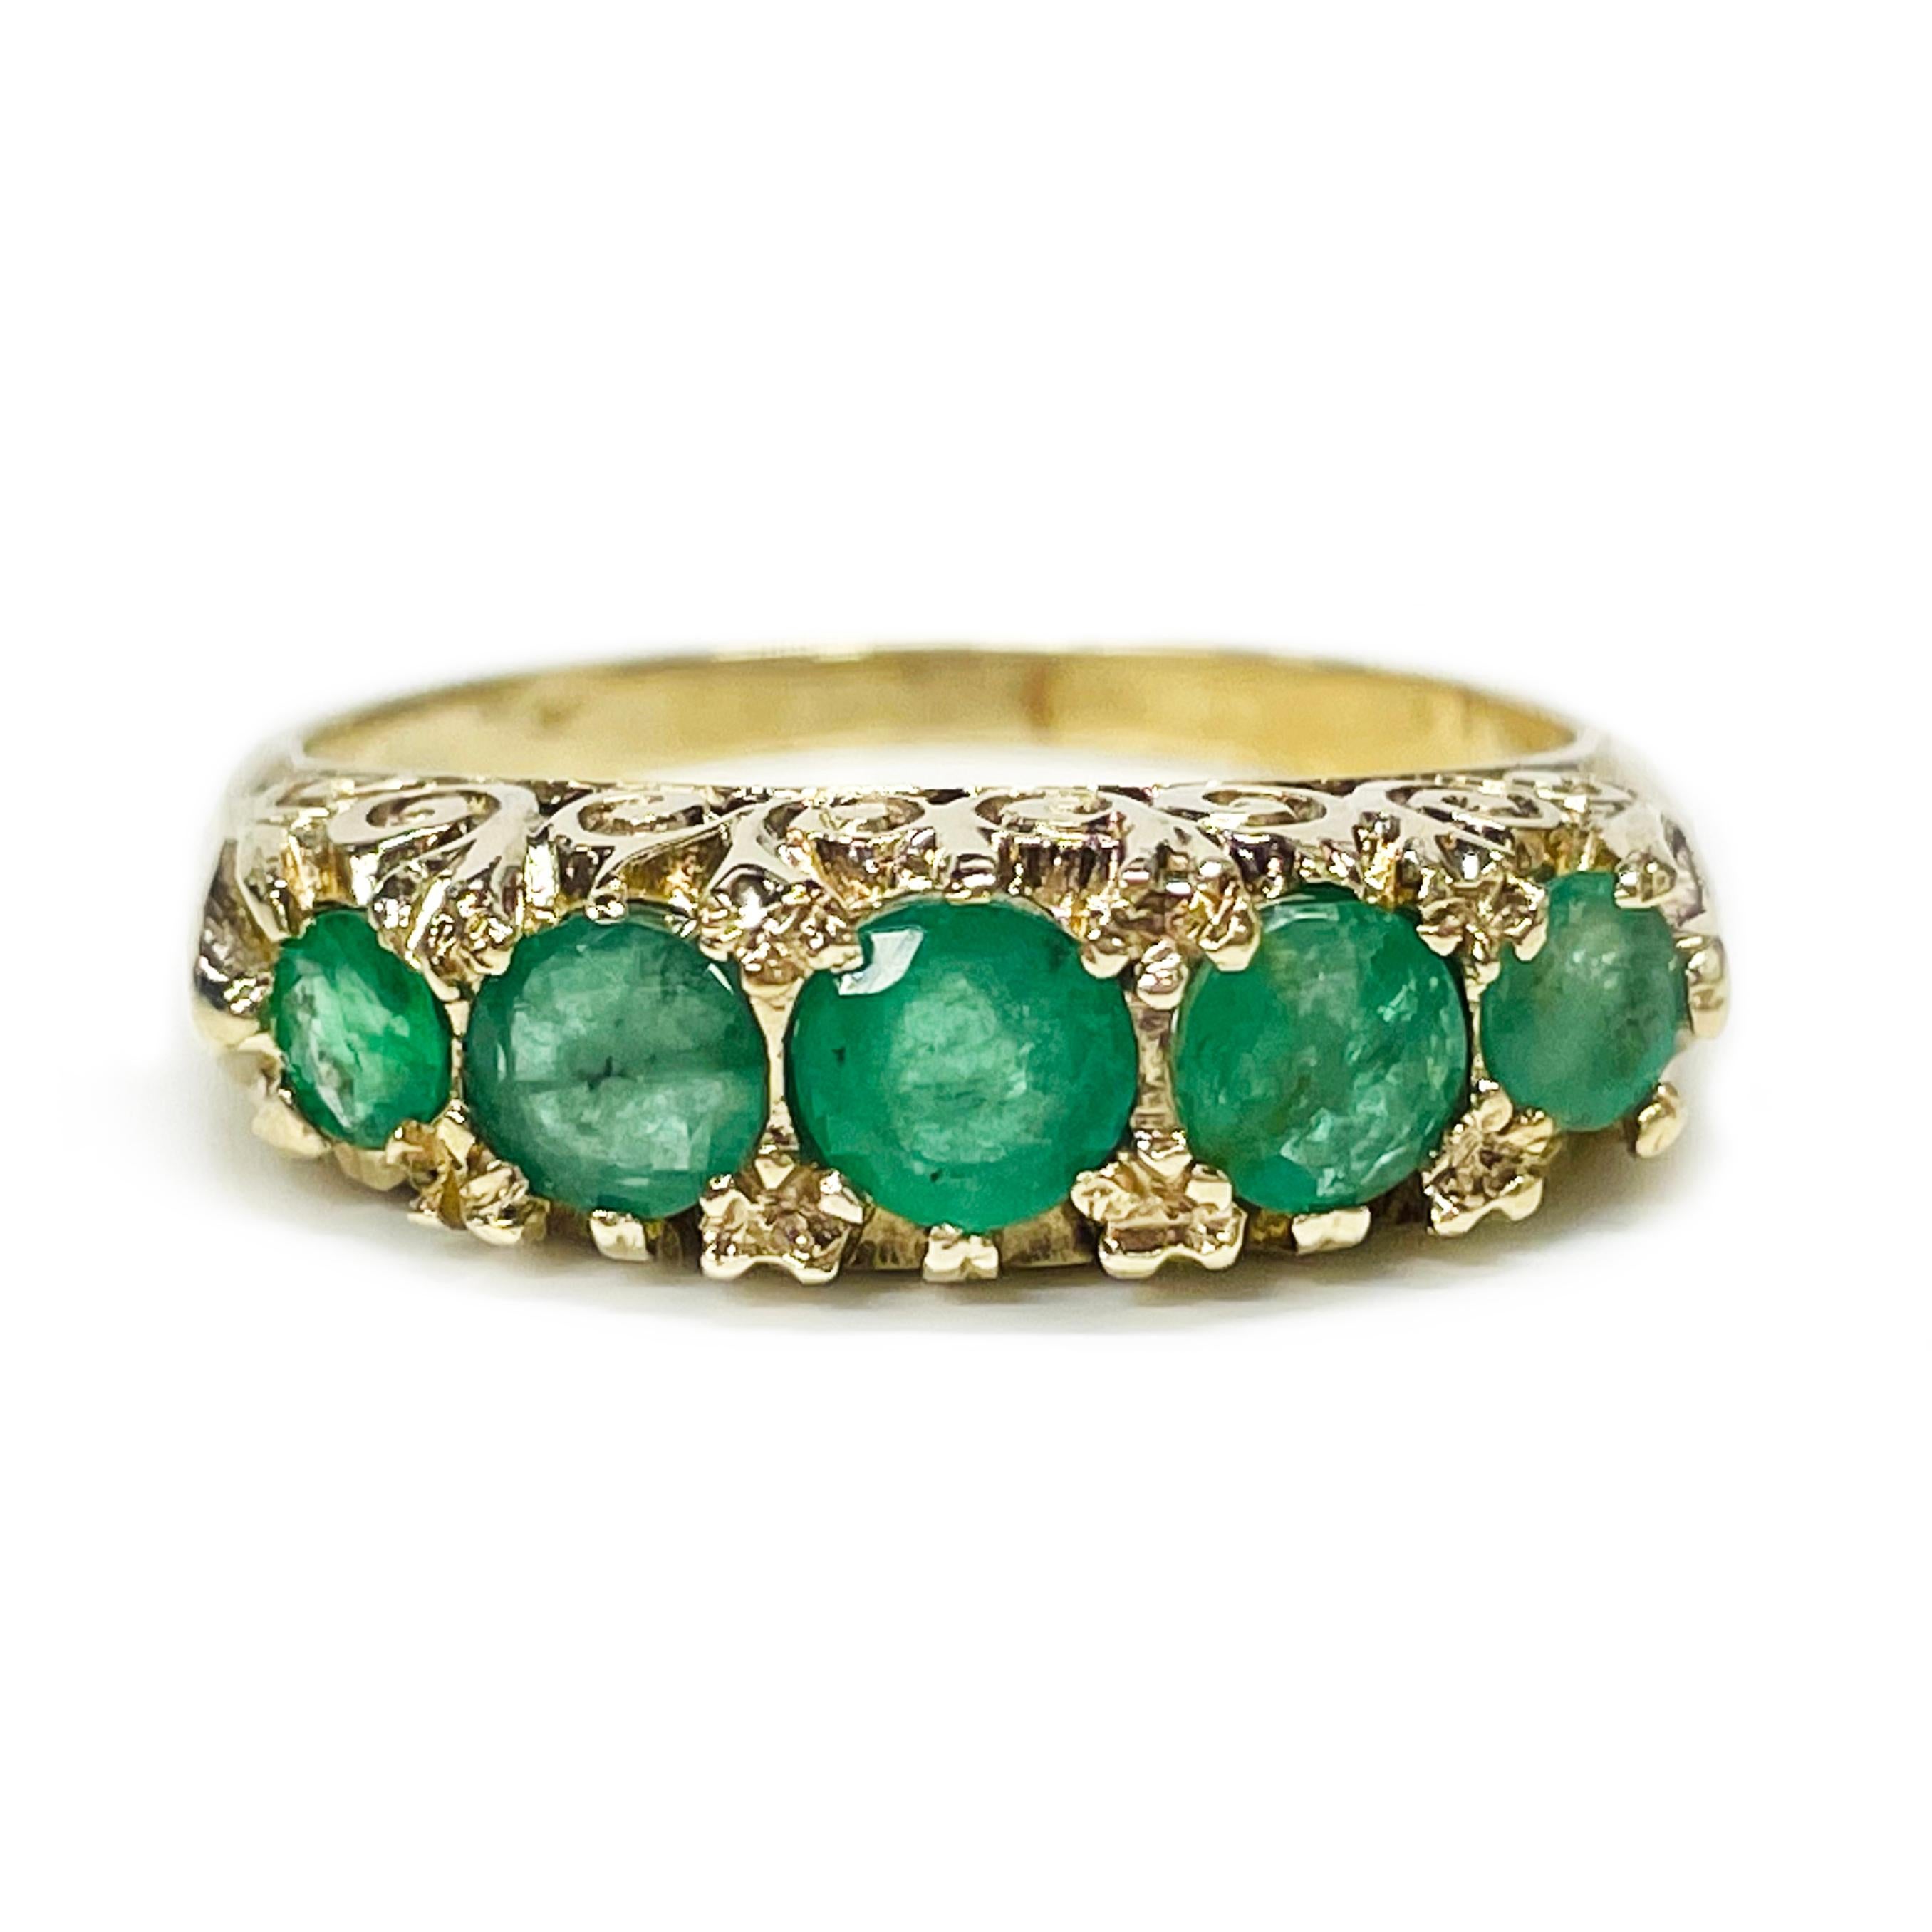 Art Deco 14 Karat Yellow Gold Emerald Ring. This original lovely ring features five round emeralds prong-set in a raised gallery. There are three 4.7mm emeralds and two 3.3mm emeralds. The ring has gold filigree scroll details on both sides of the